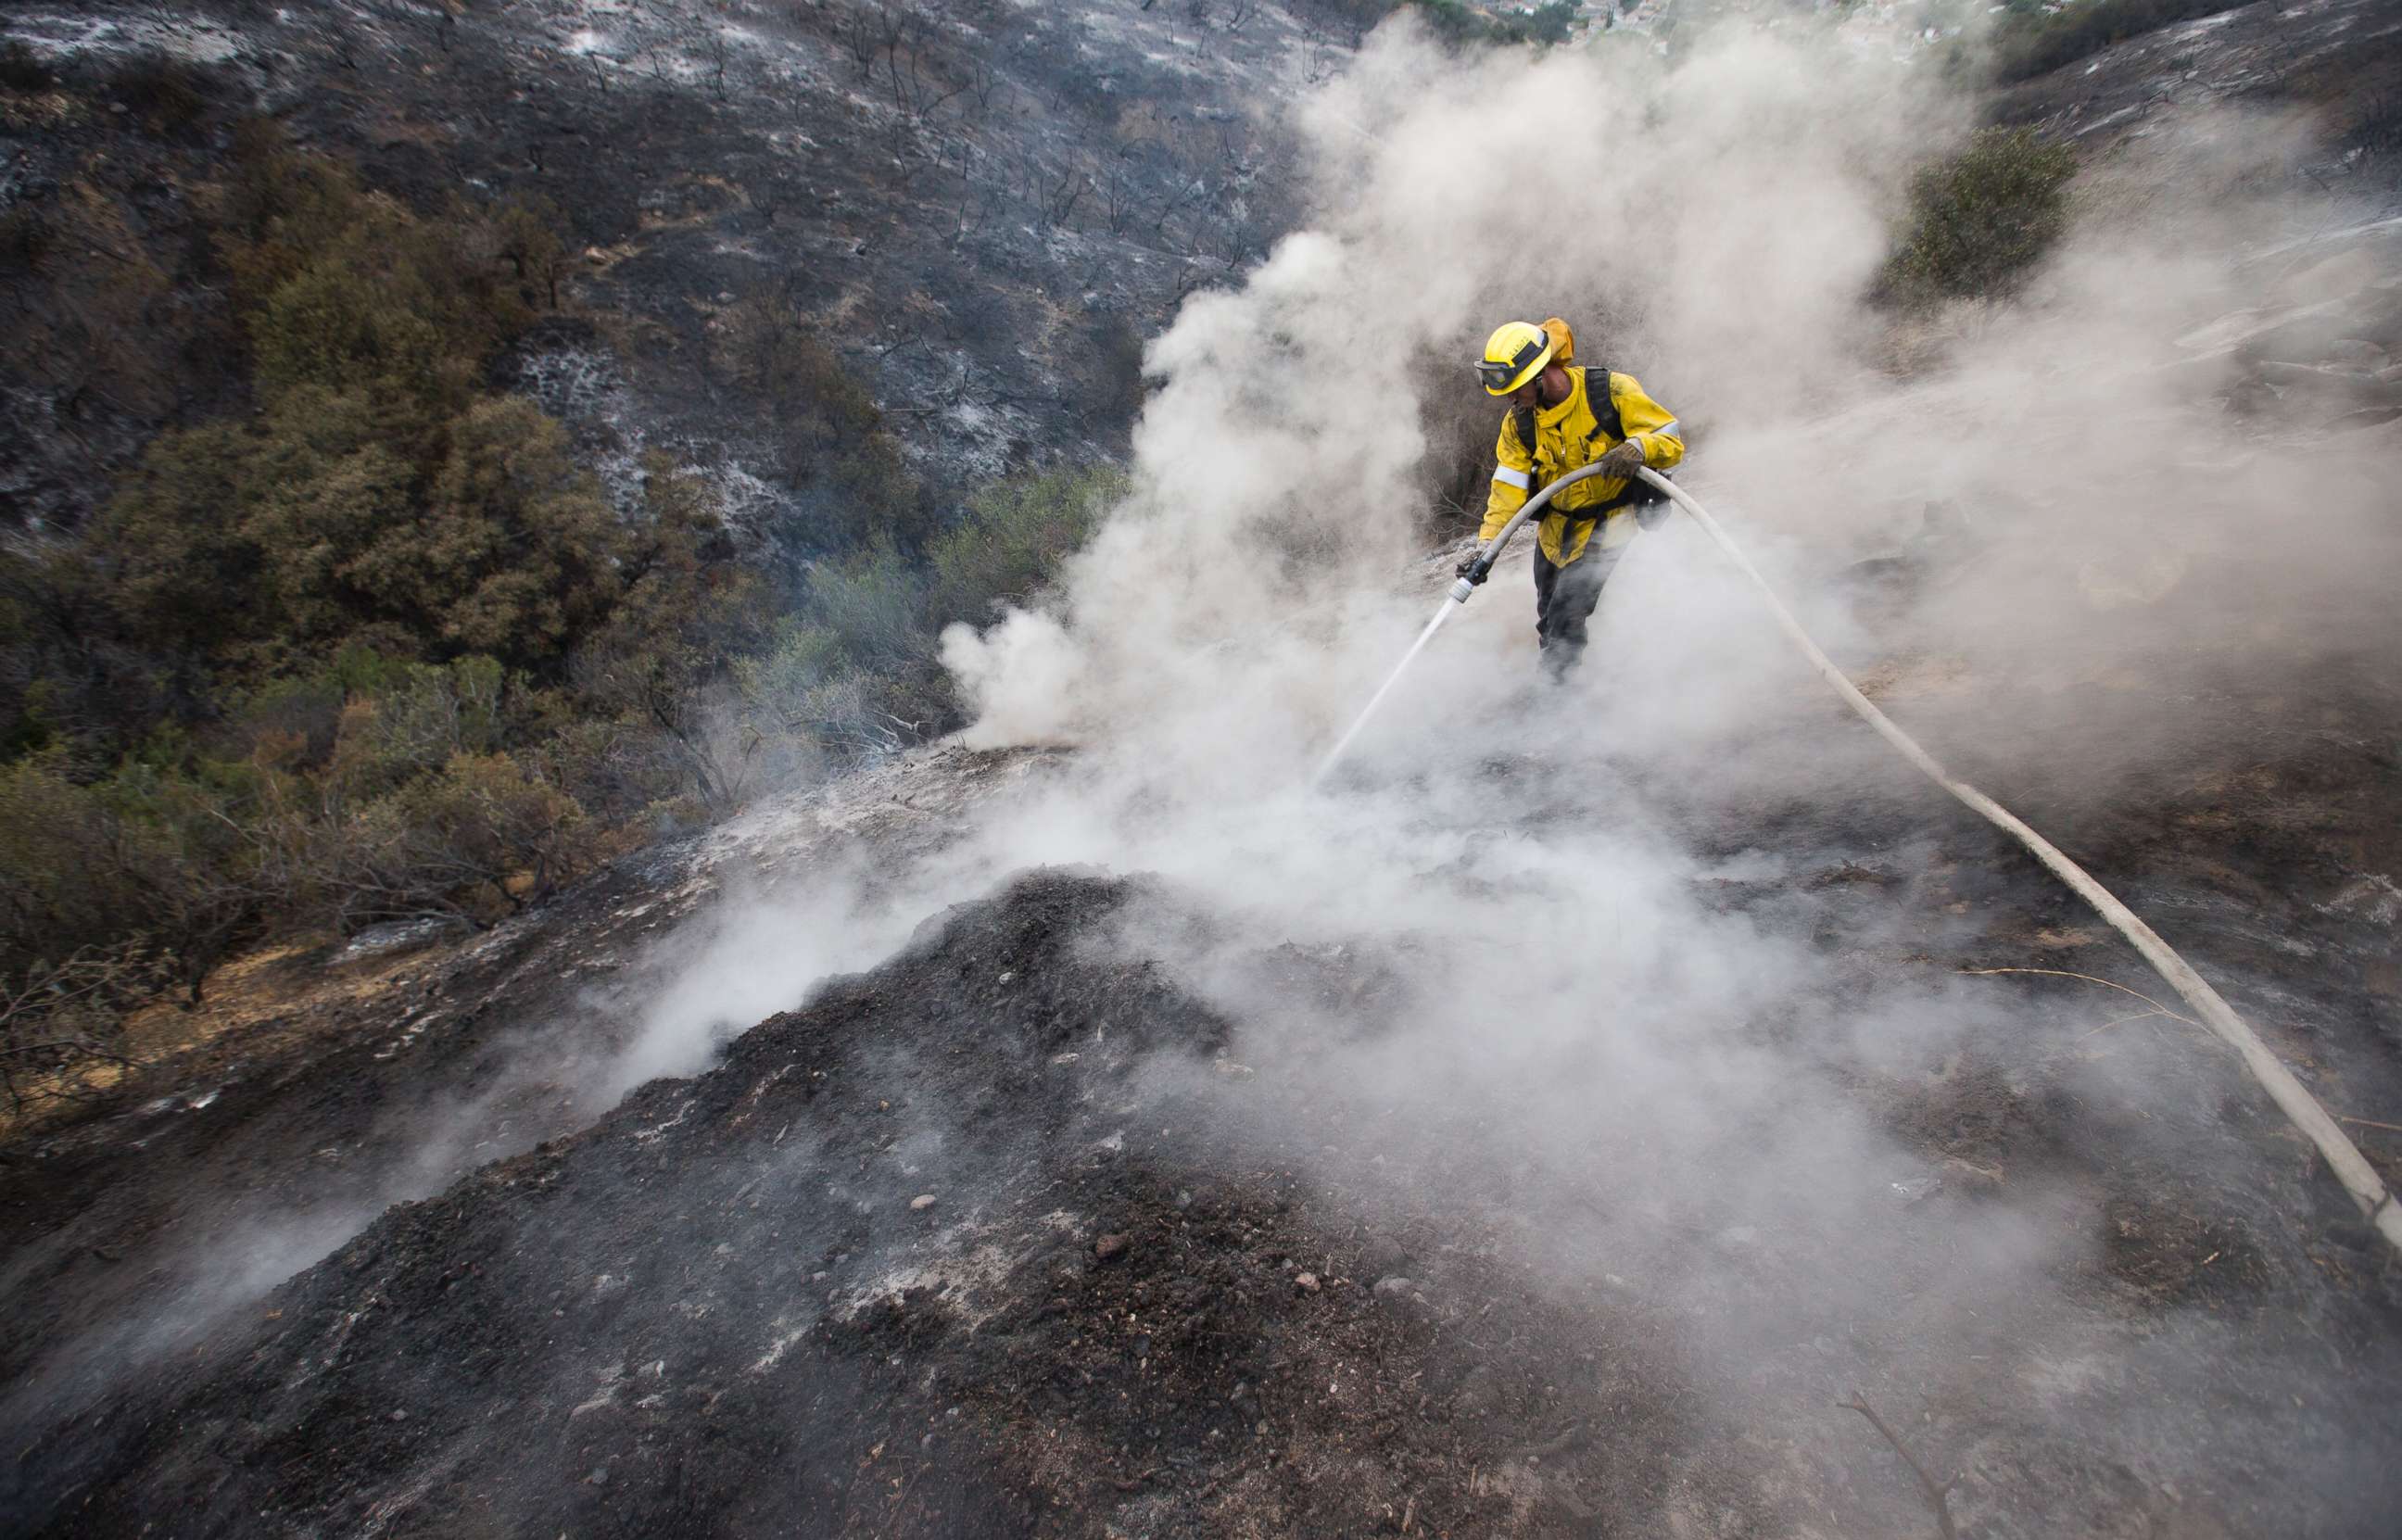 PHOTO: LA County firefighter Kevin Sleight extinguishes hot spots while battling the La Tuna Canyon fire. Firefighters were assisted by cooler temperatures and brief showers in their battle against the 5,900-acre brush fire north of downtown Los Angeles. 